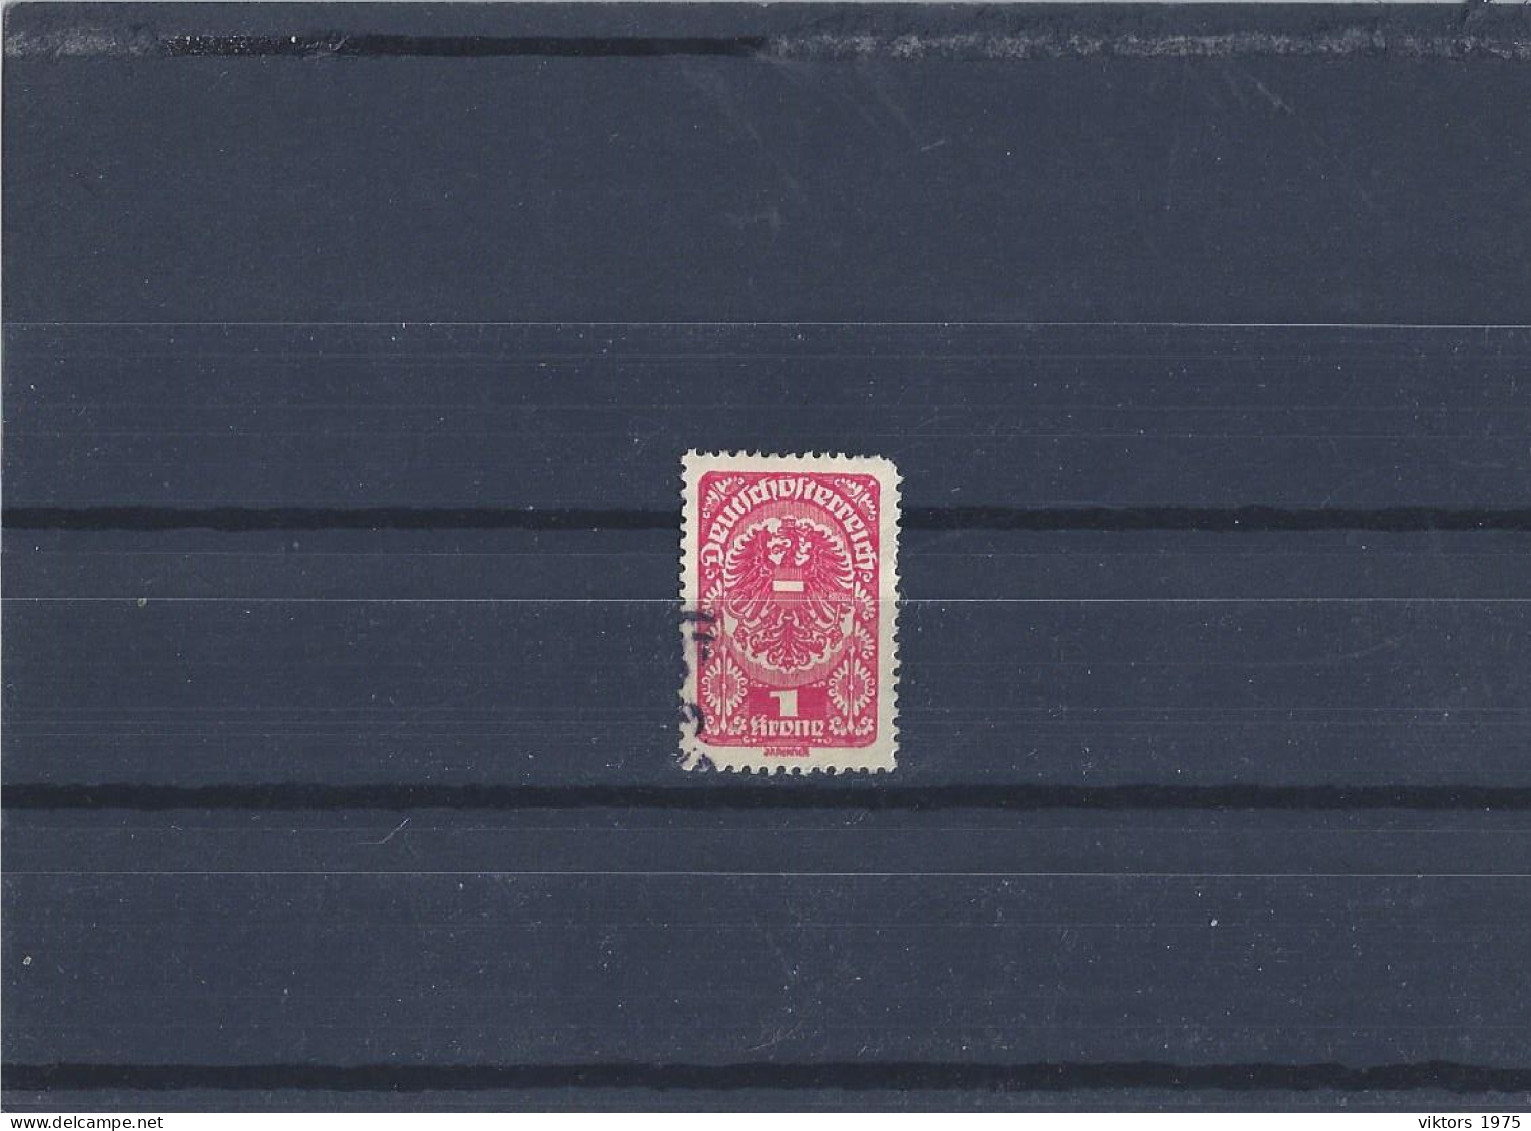 Used Stamp Nr.273 In MICHEL Catalog - Used Stamps